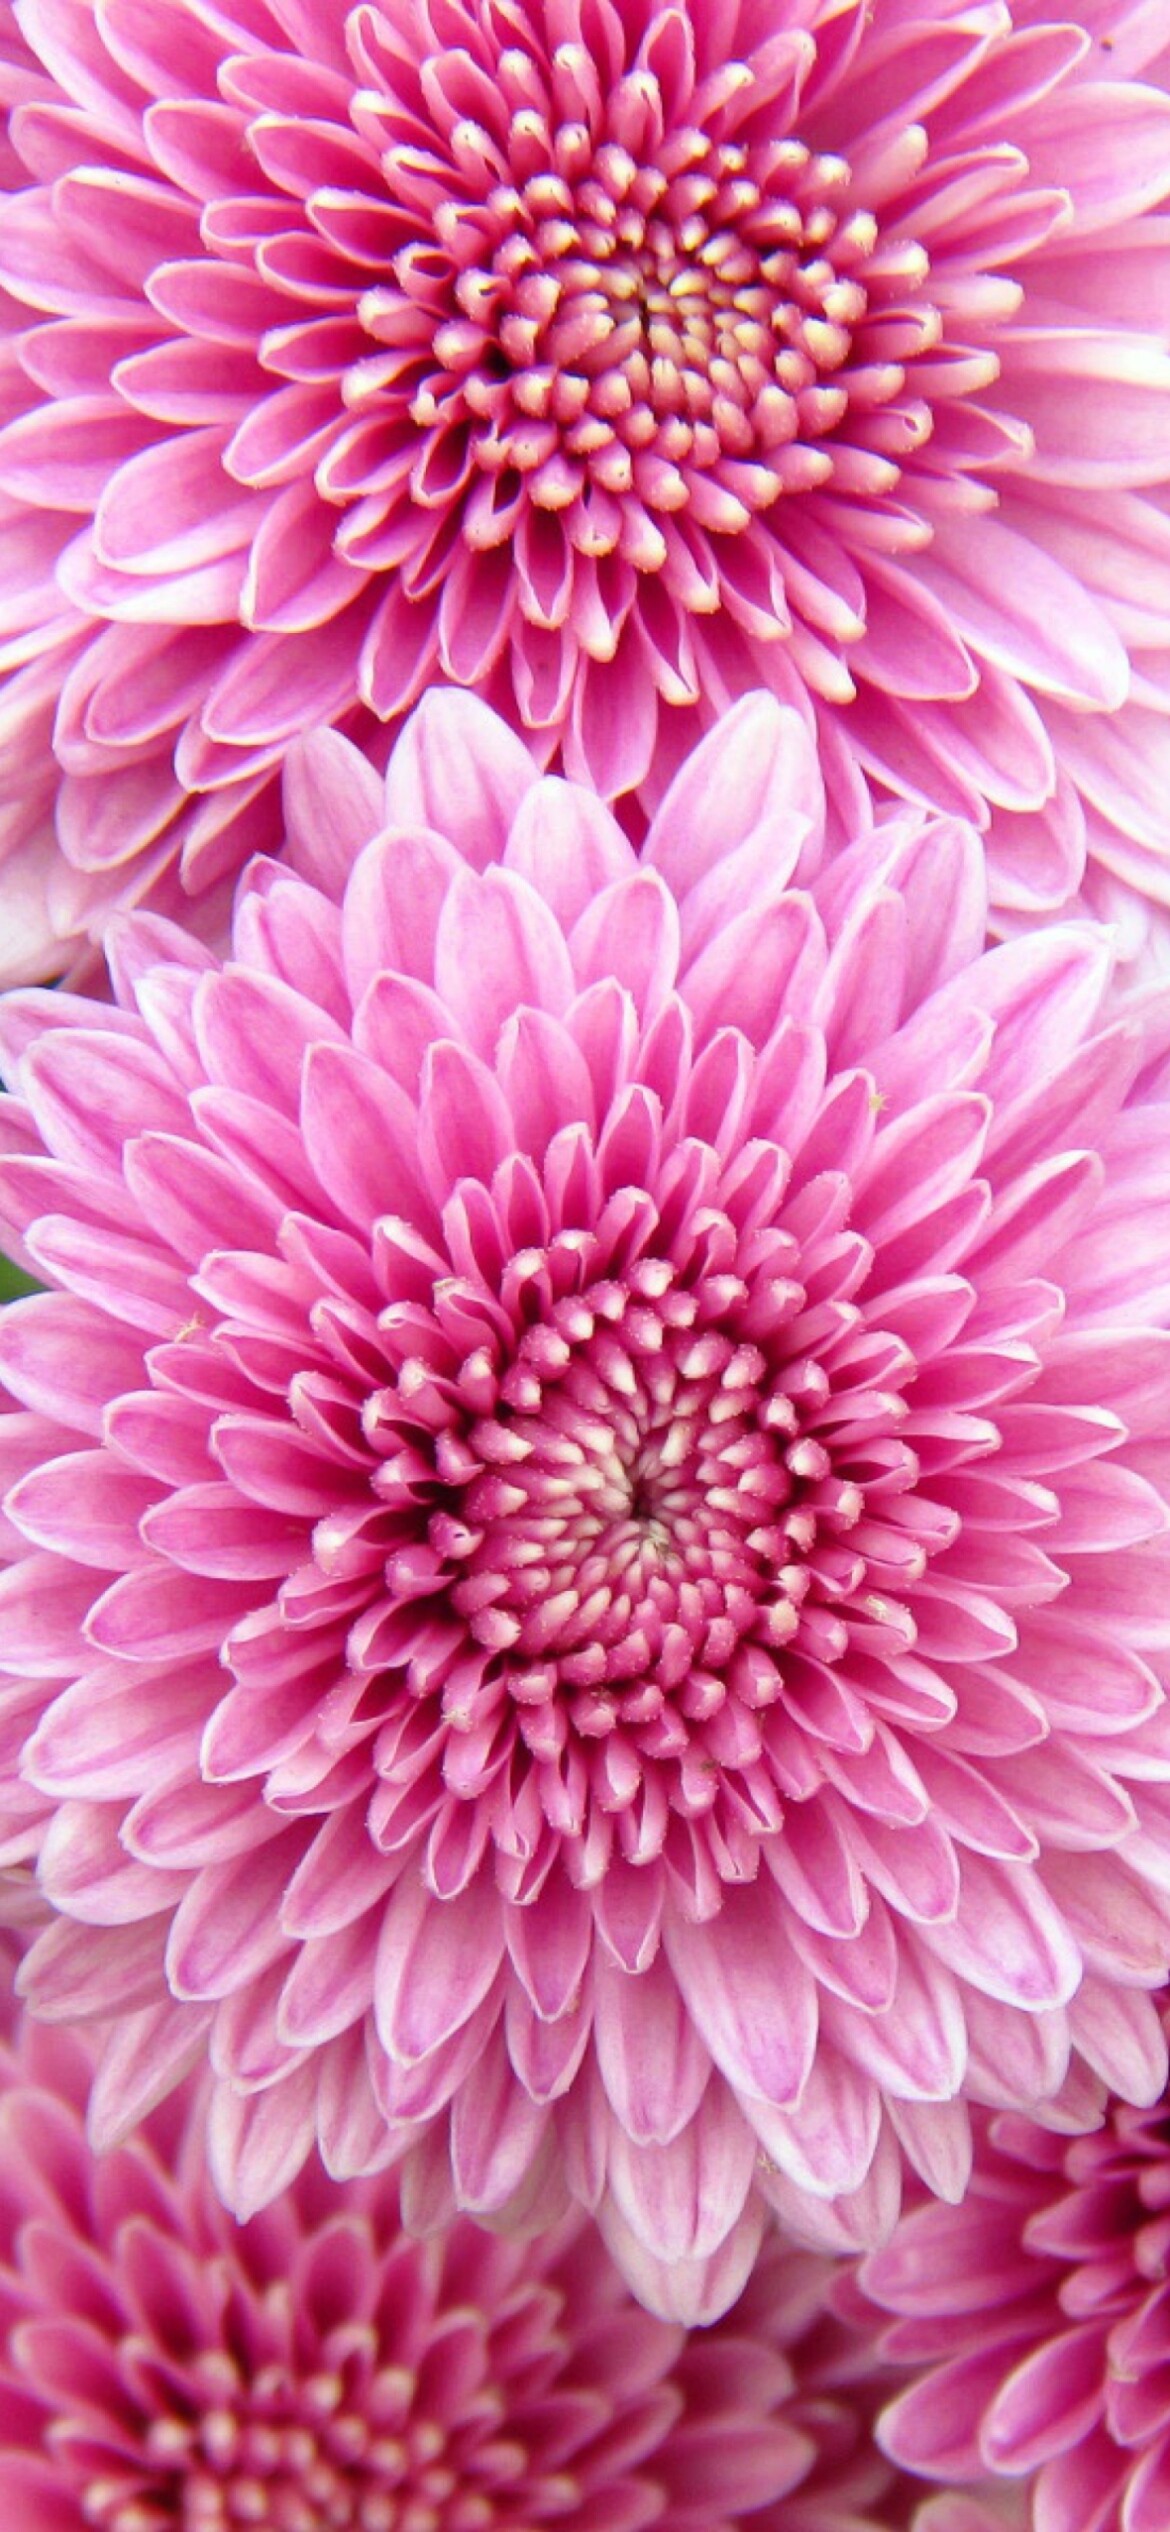 Chrysanthemum: In Chinese culture, it is a symbol of autumn and the flower of the ninth moon. 1170x2540 HD Wallpaper.